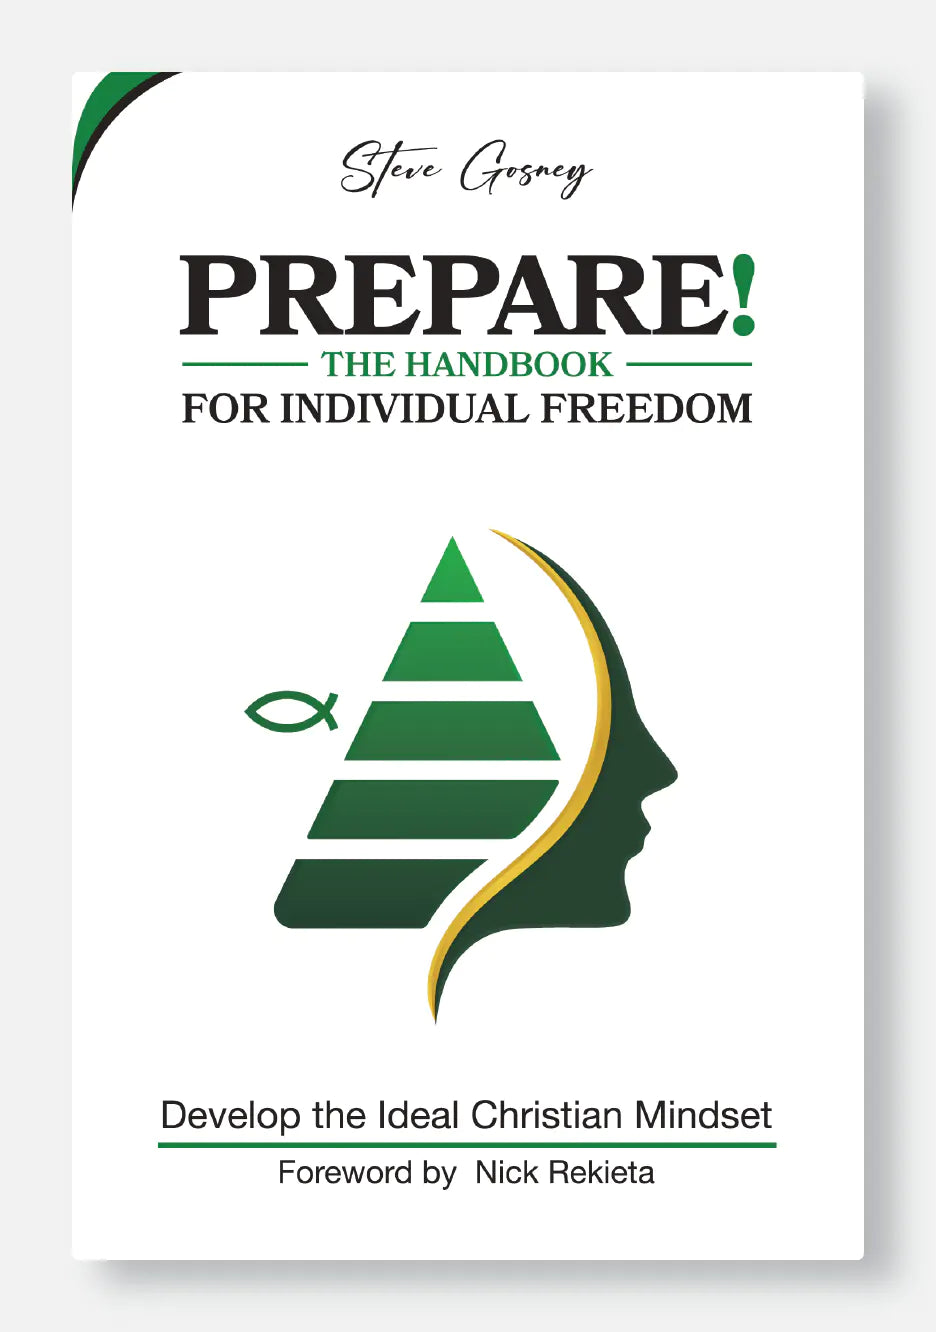 Prepare! The Handbook for Individual Freedom (autographed)